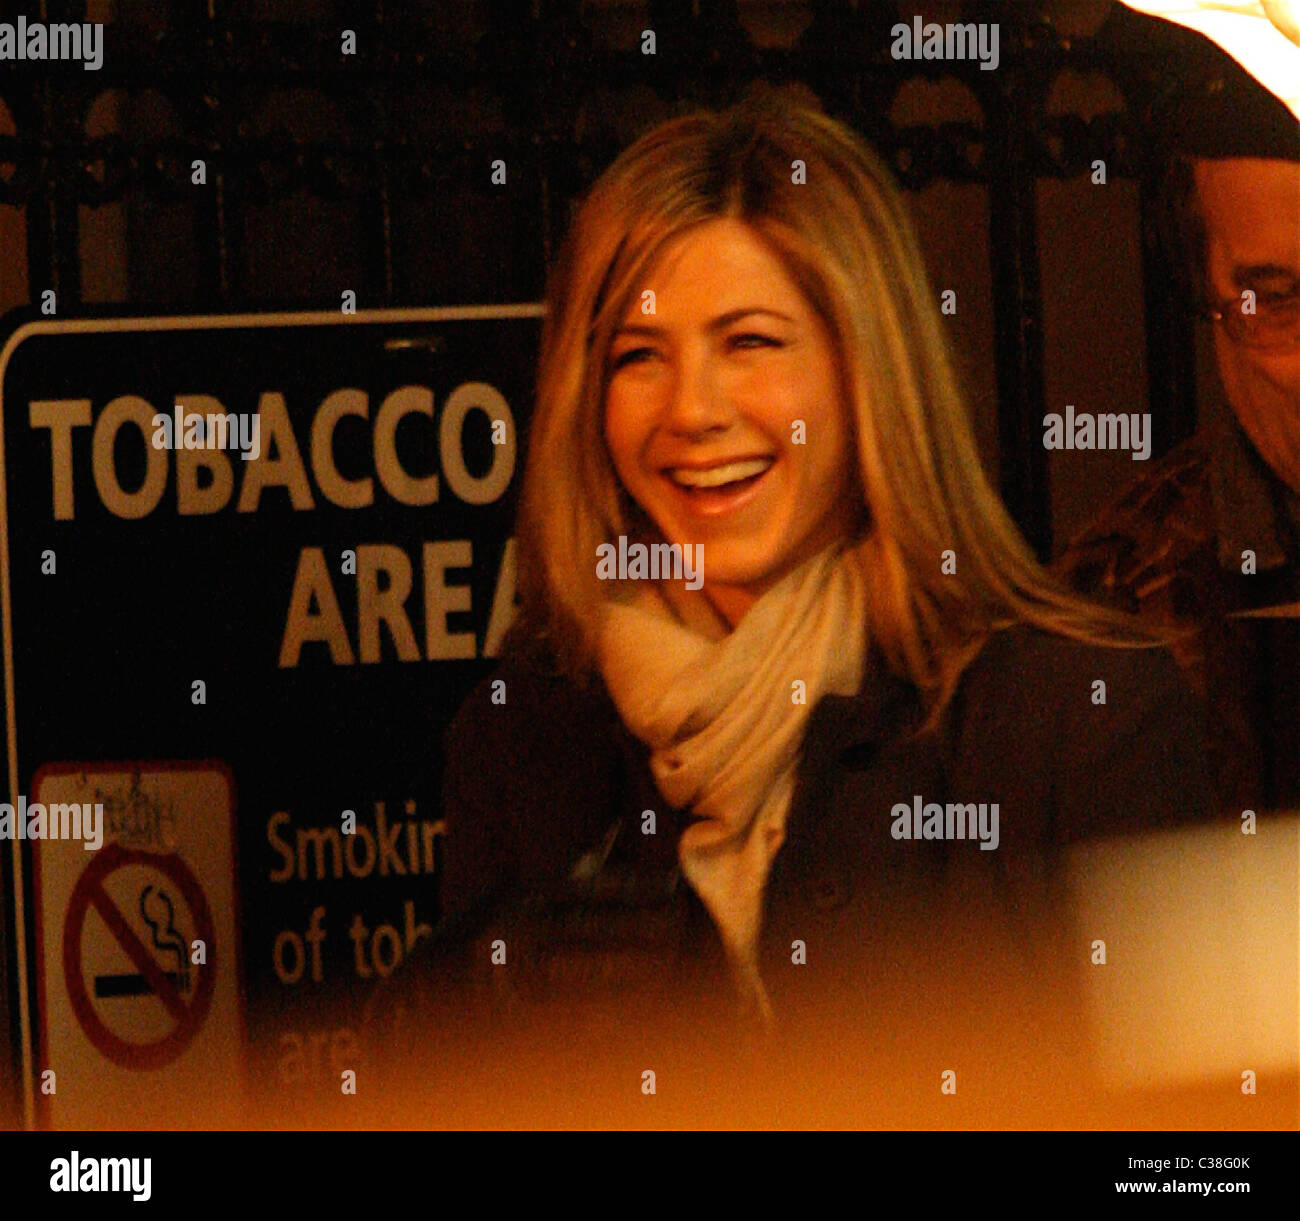 Jennifer Aniston on the set of her new film 'The Baster' shooting in Manhattan New York City, USA - 08.04.08 Stock Photo